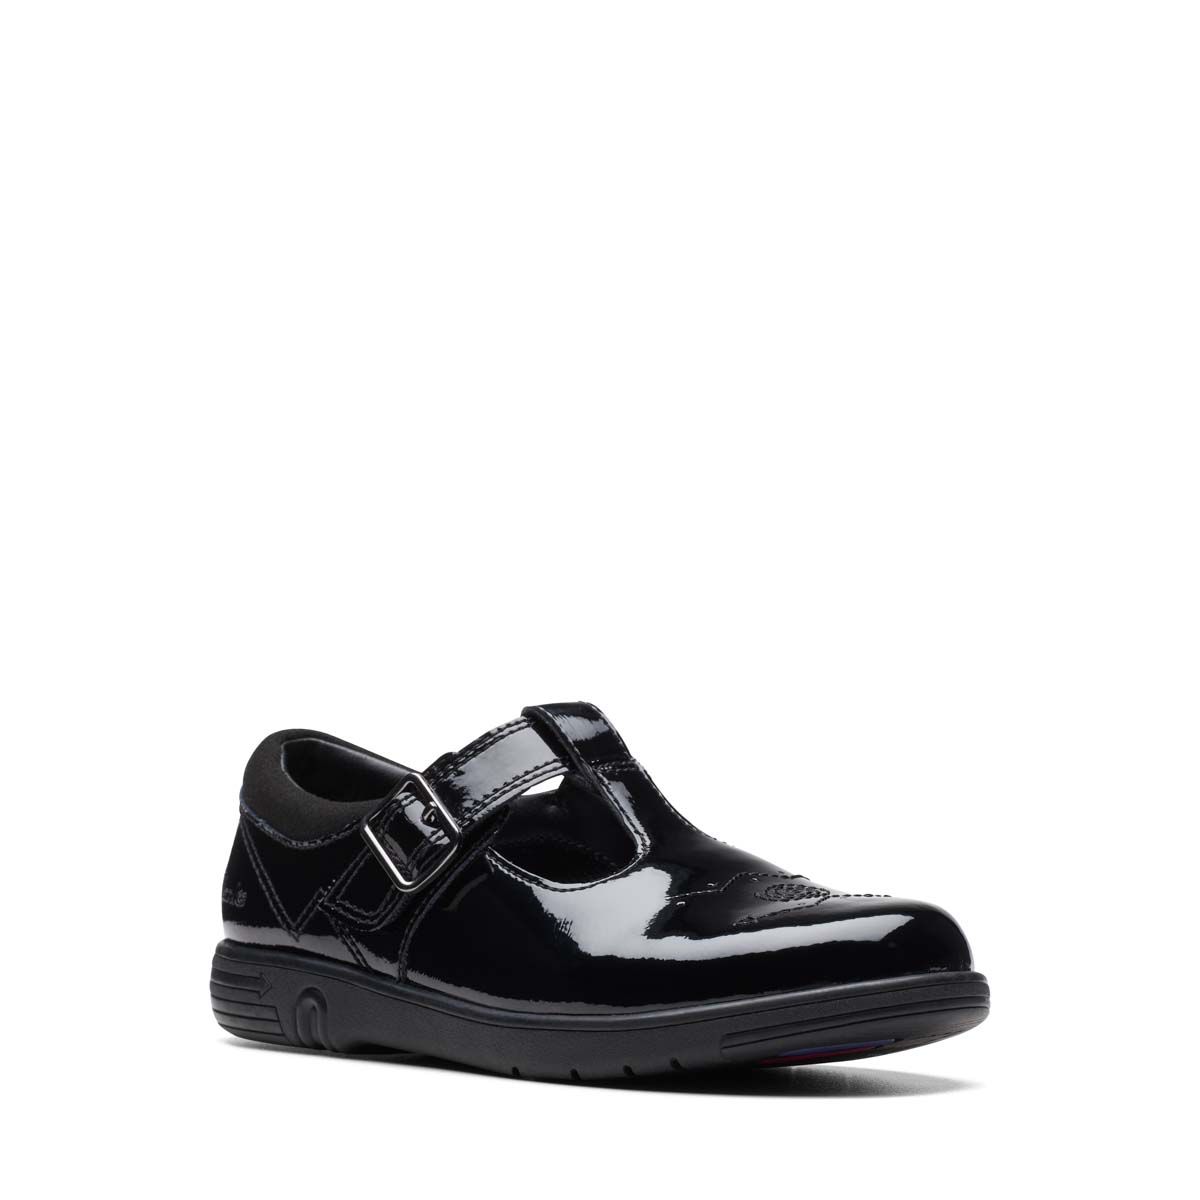 Clarks Jazzy Tap T Bar Black Patent Kids Girls School Shoes 753076F In Size 9.5 In Plain Black Patent F Width Fitting Regular Fit For School For kids